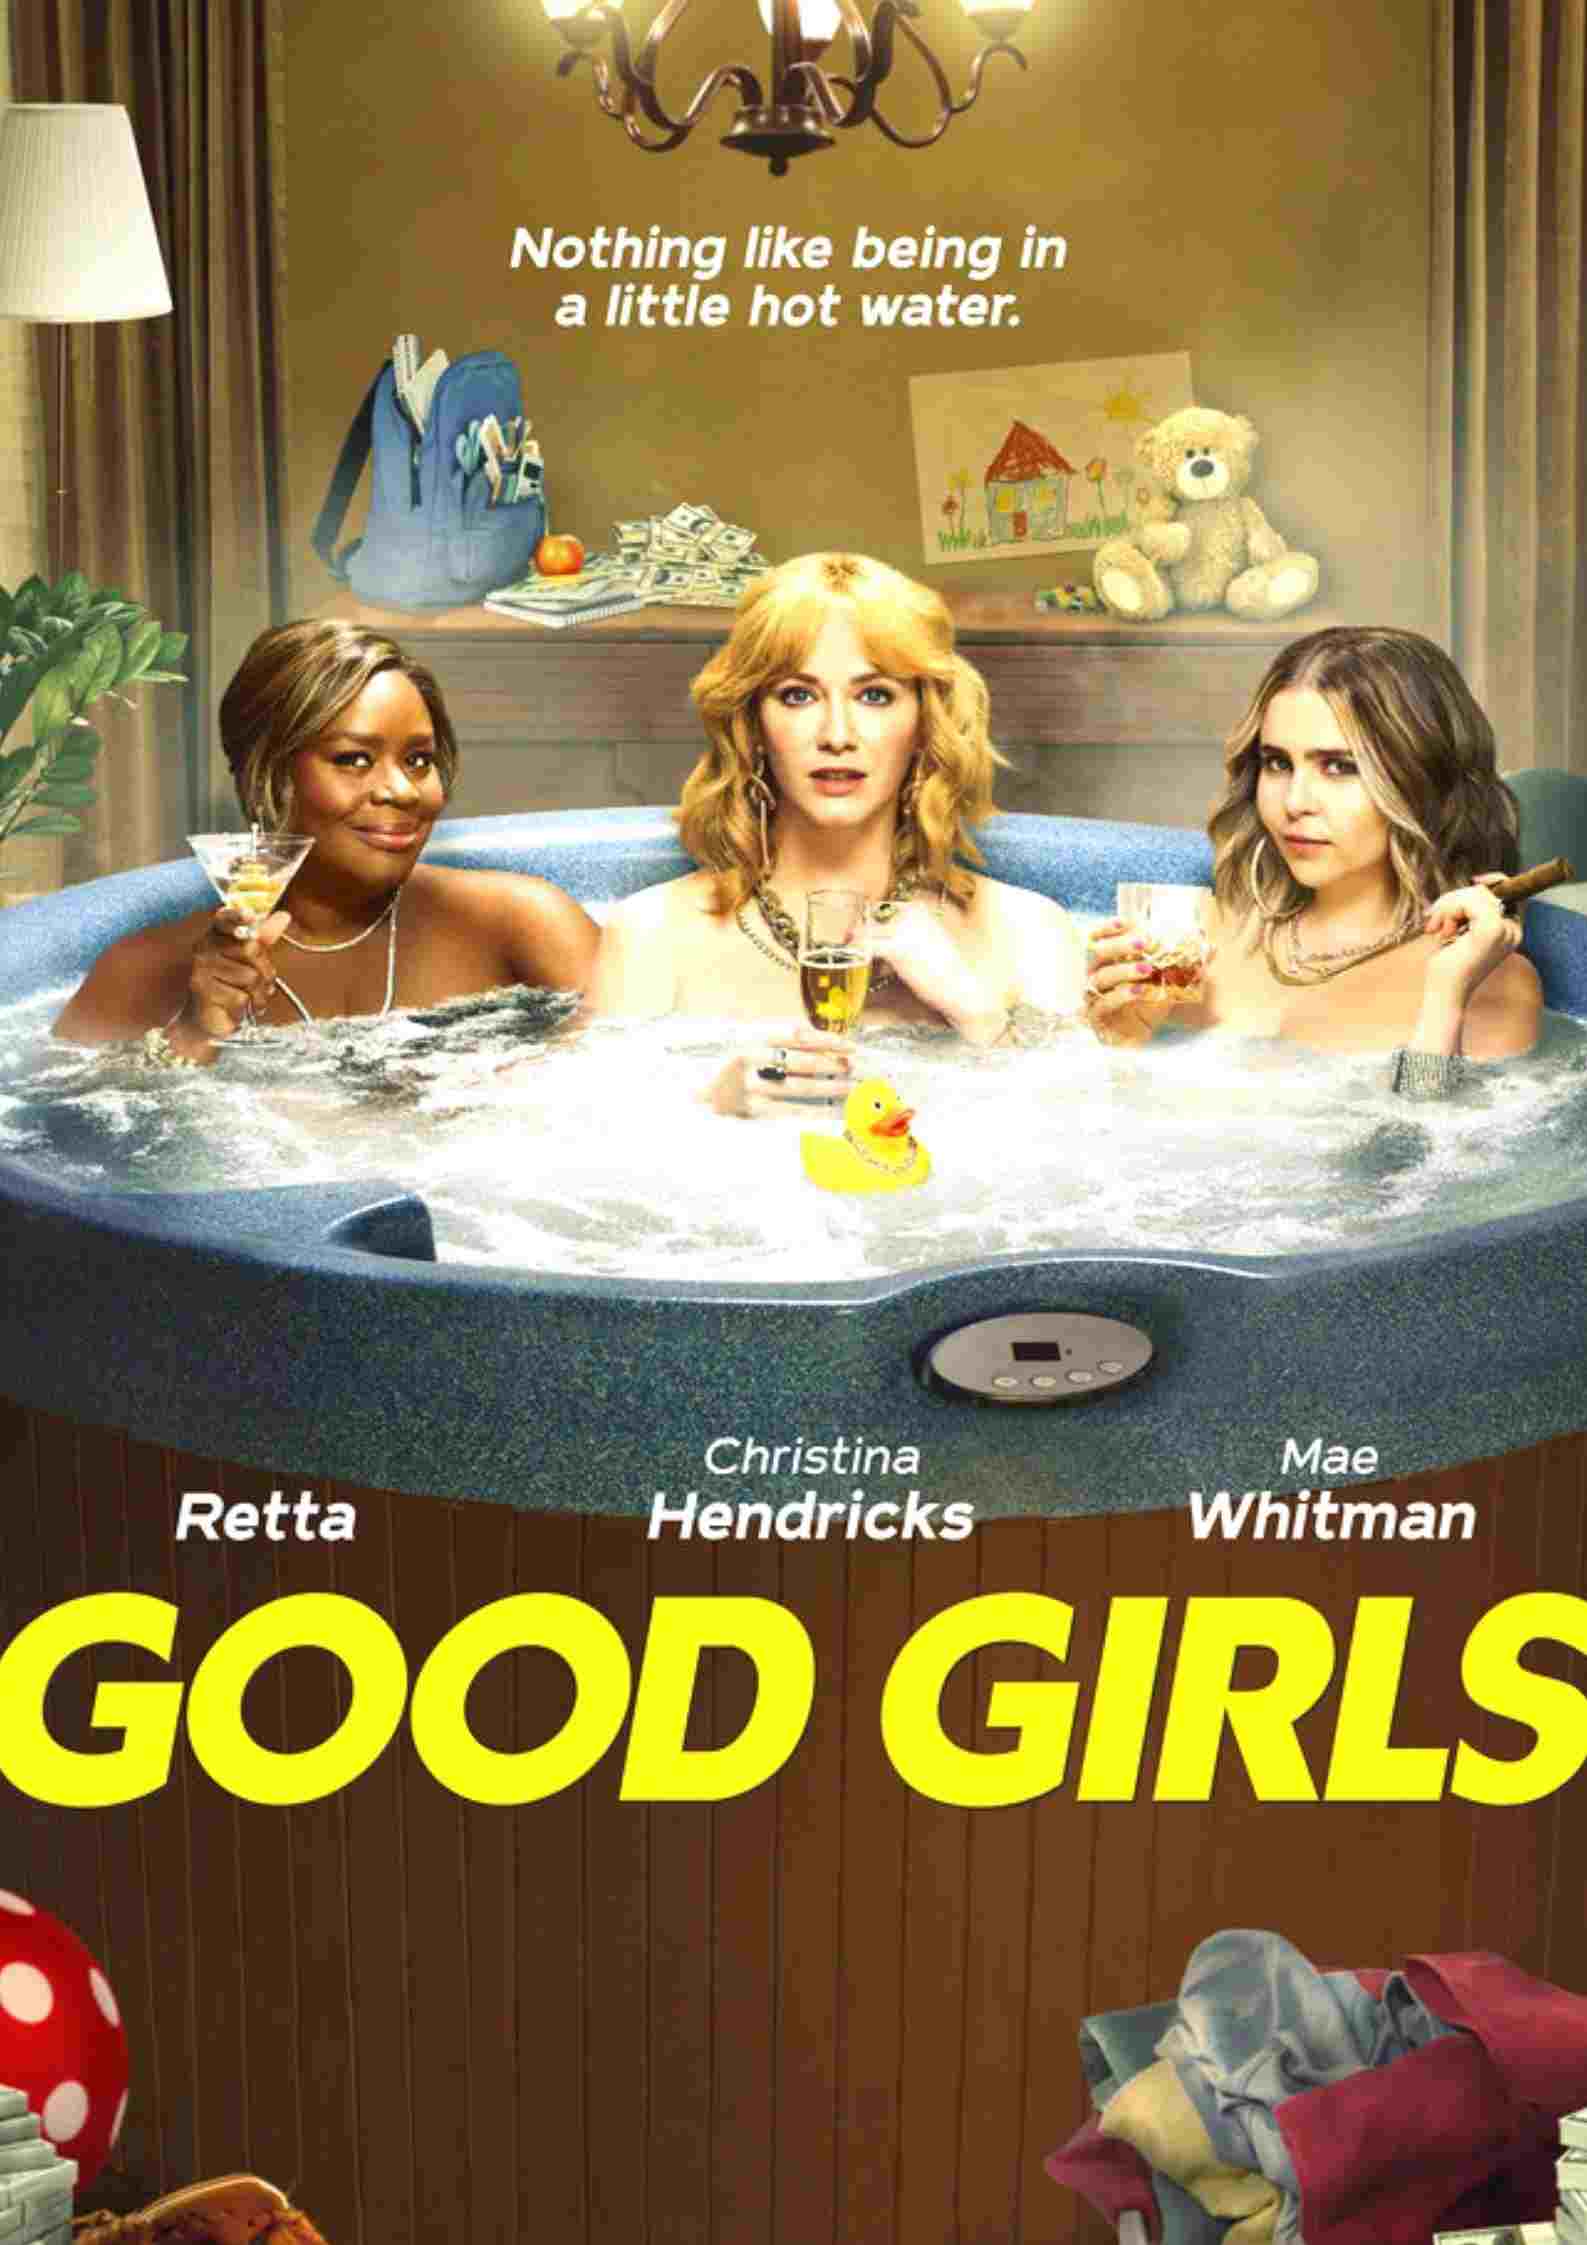 Good Girls Parents guide and age rating | 2022